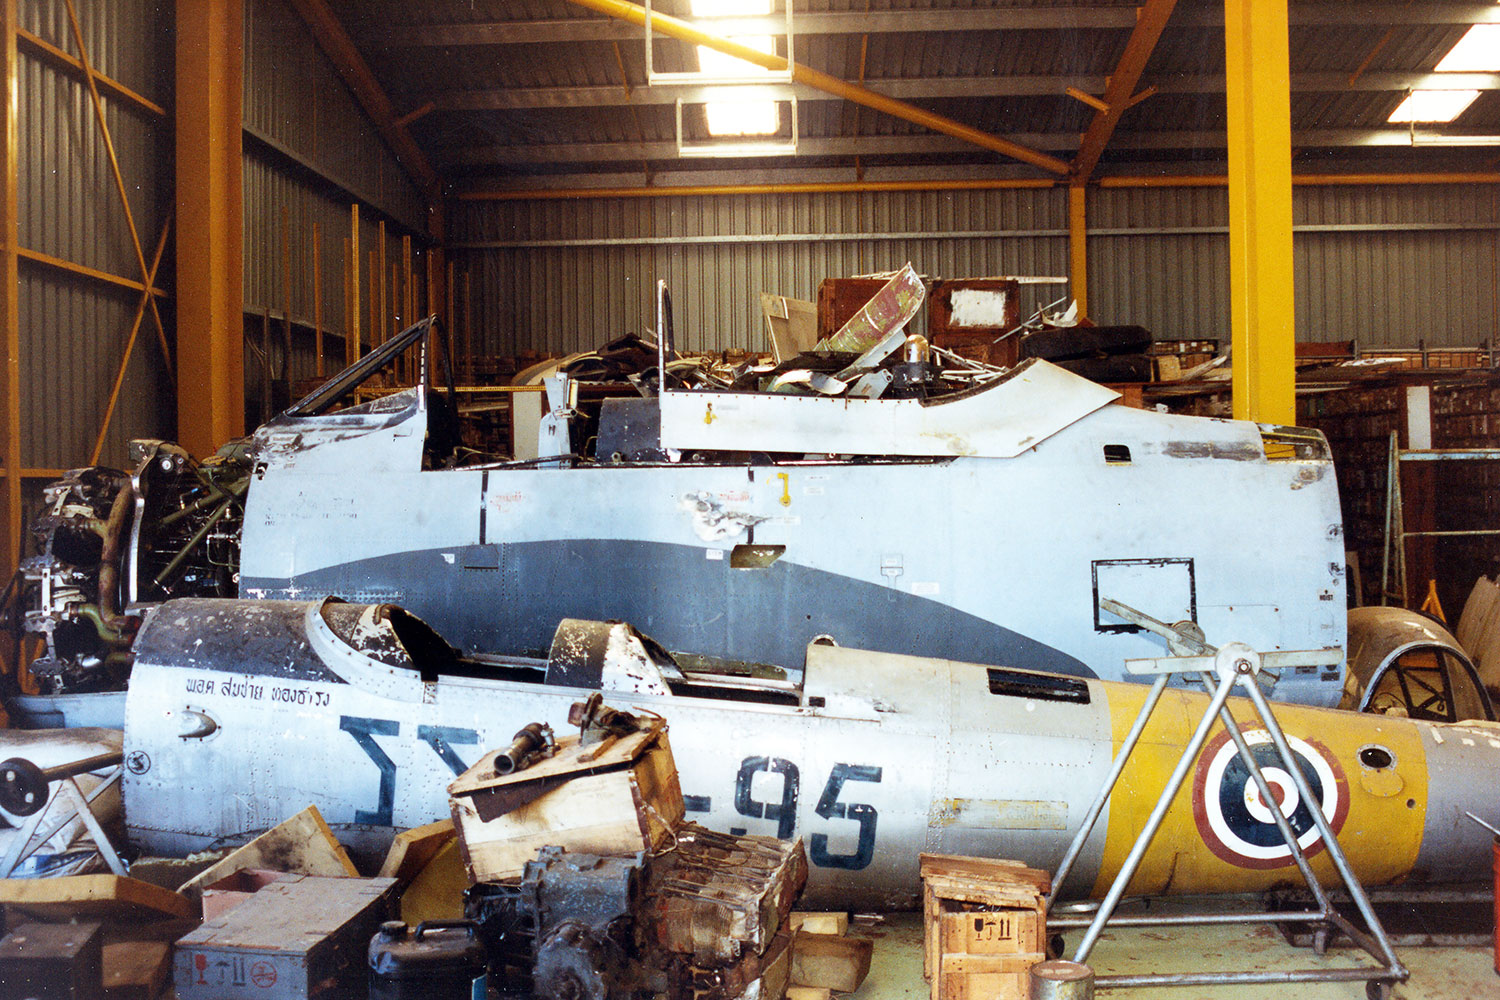 DHC11 Chipmunk VH-AMV at Col Pay's storage